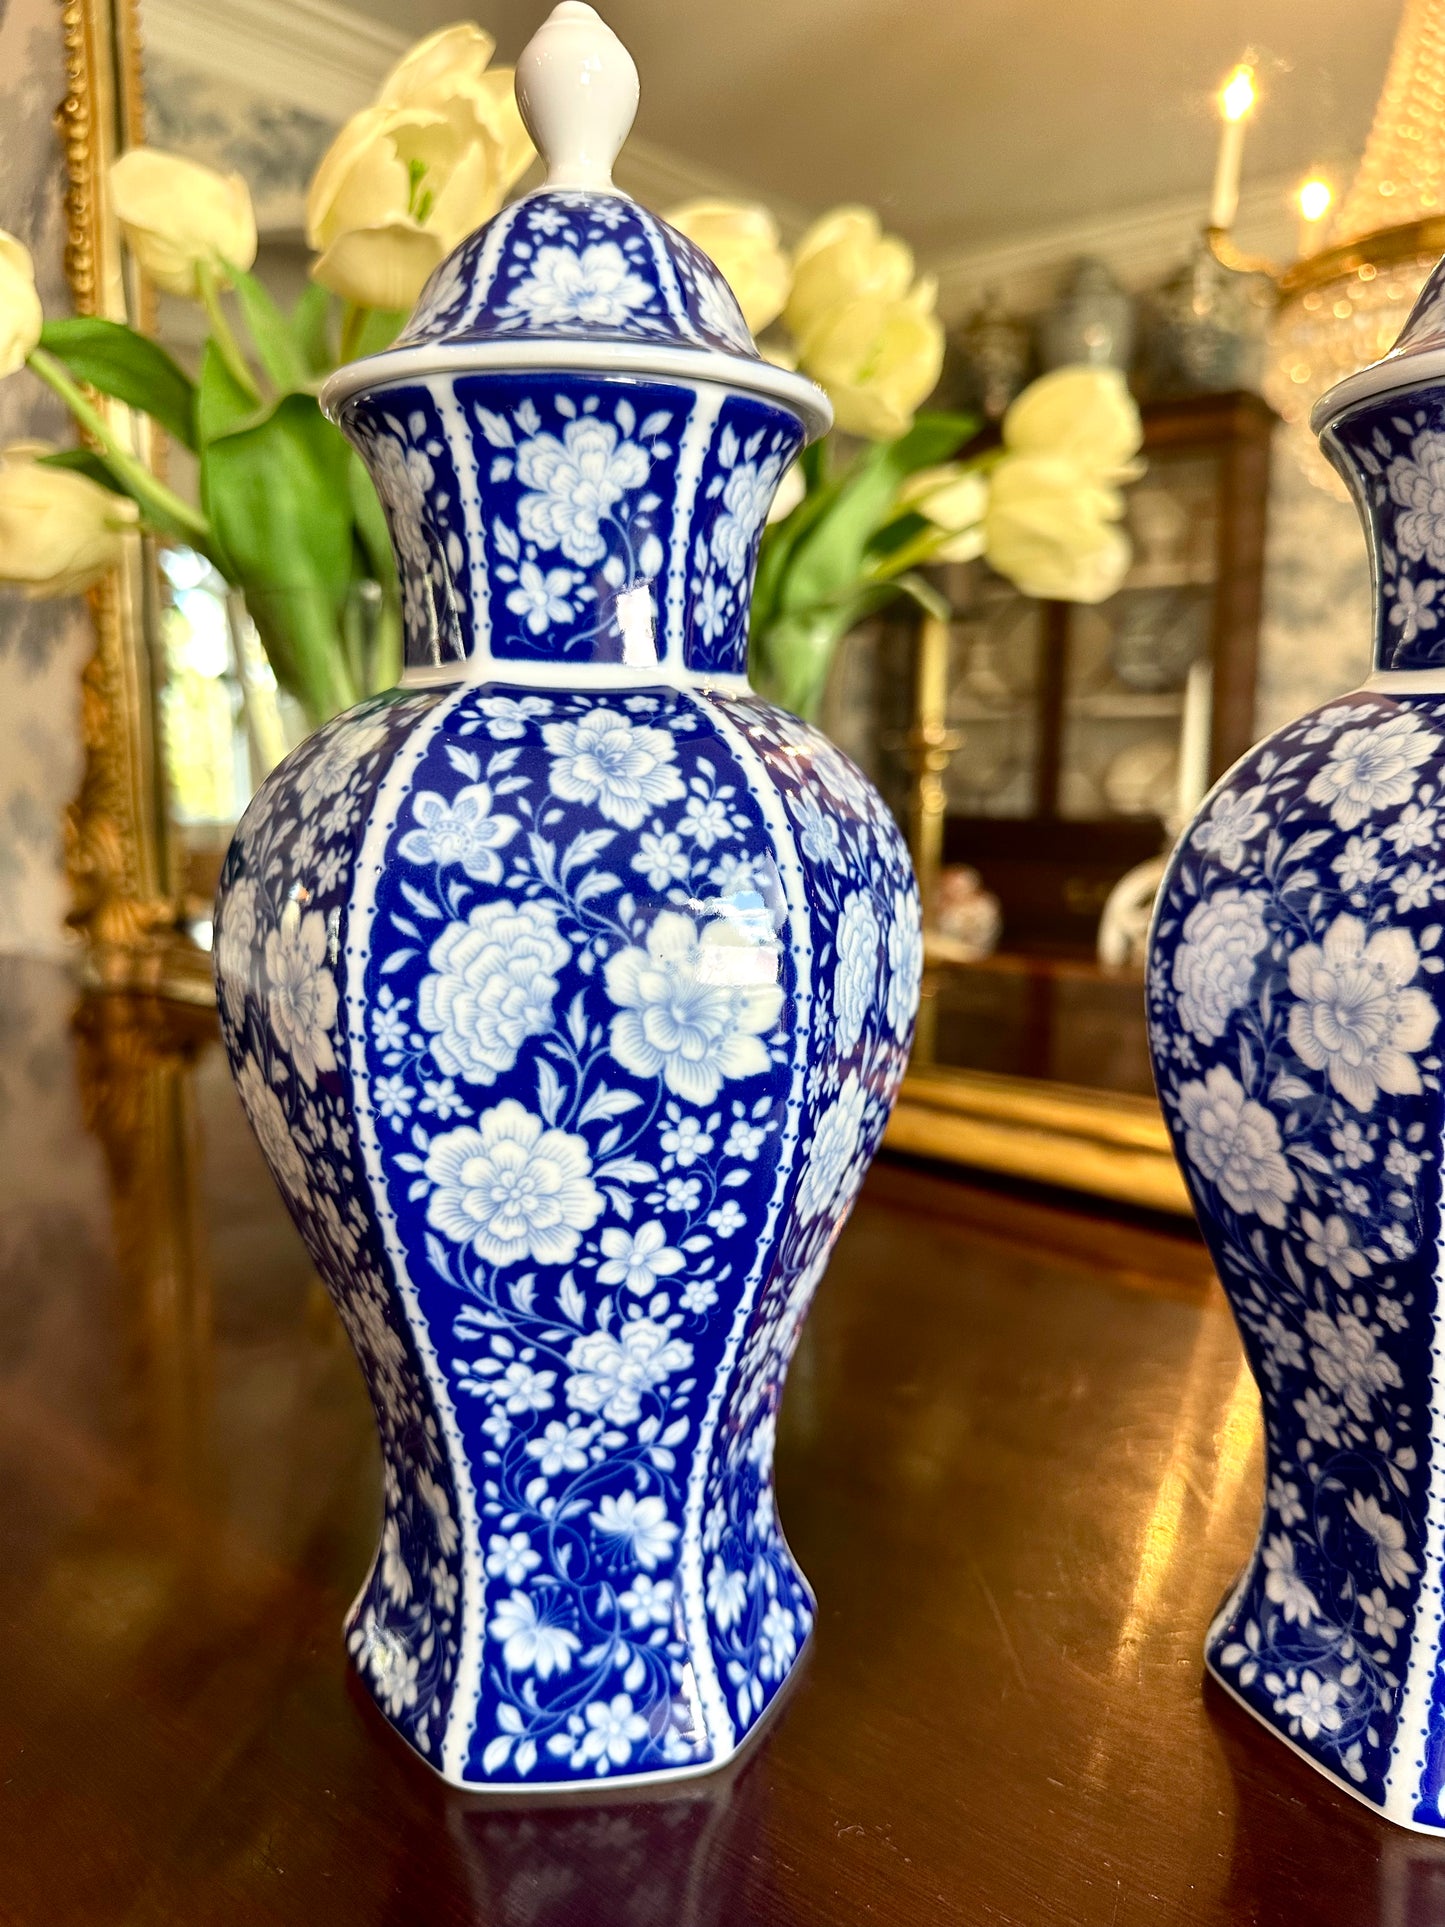 Beautiful German Pair of Blue & White Floral Porcelain Urns, 12.5” high x 5.5” wide - Pristine!